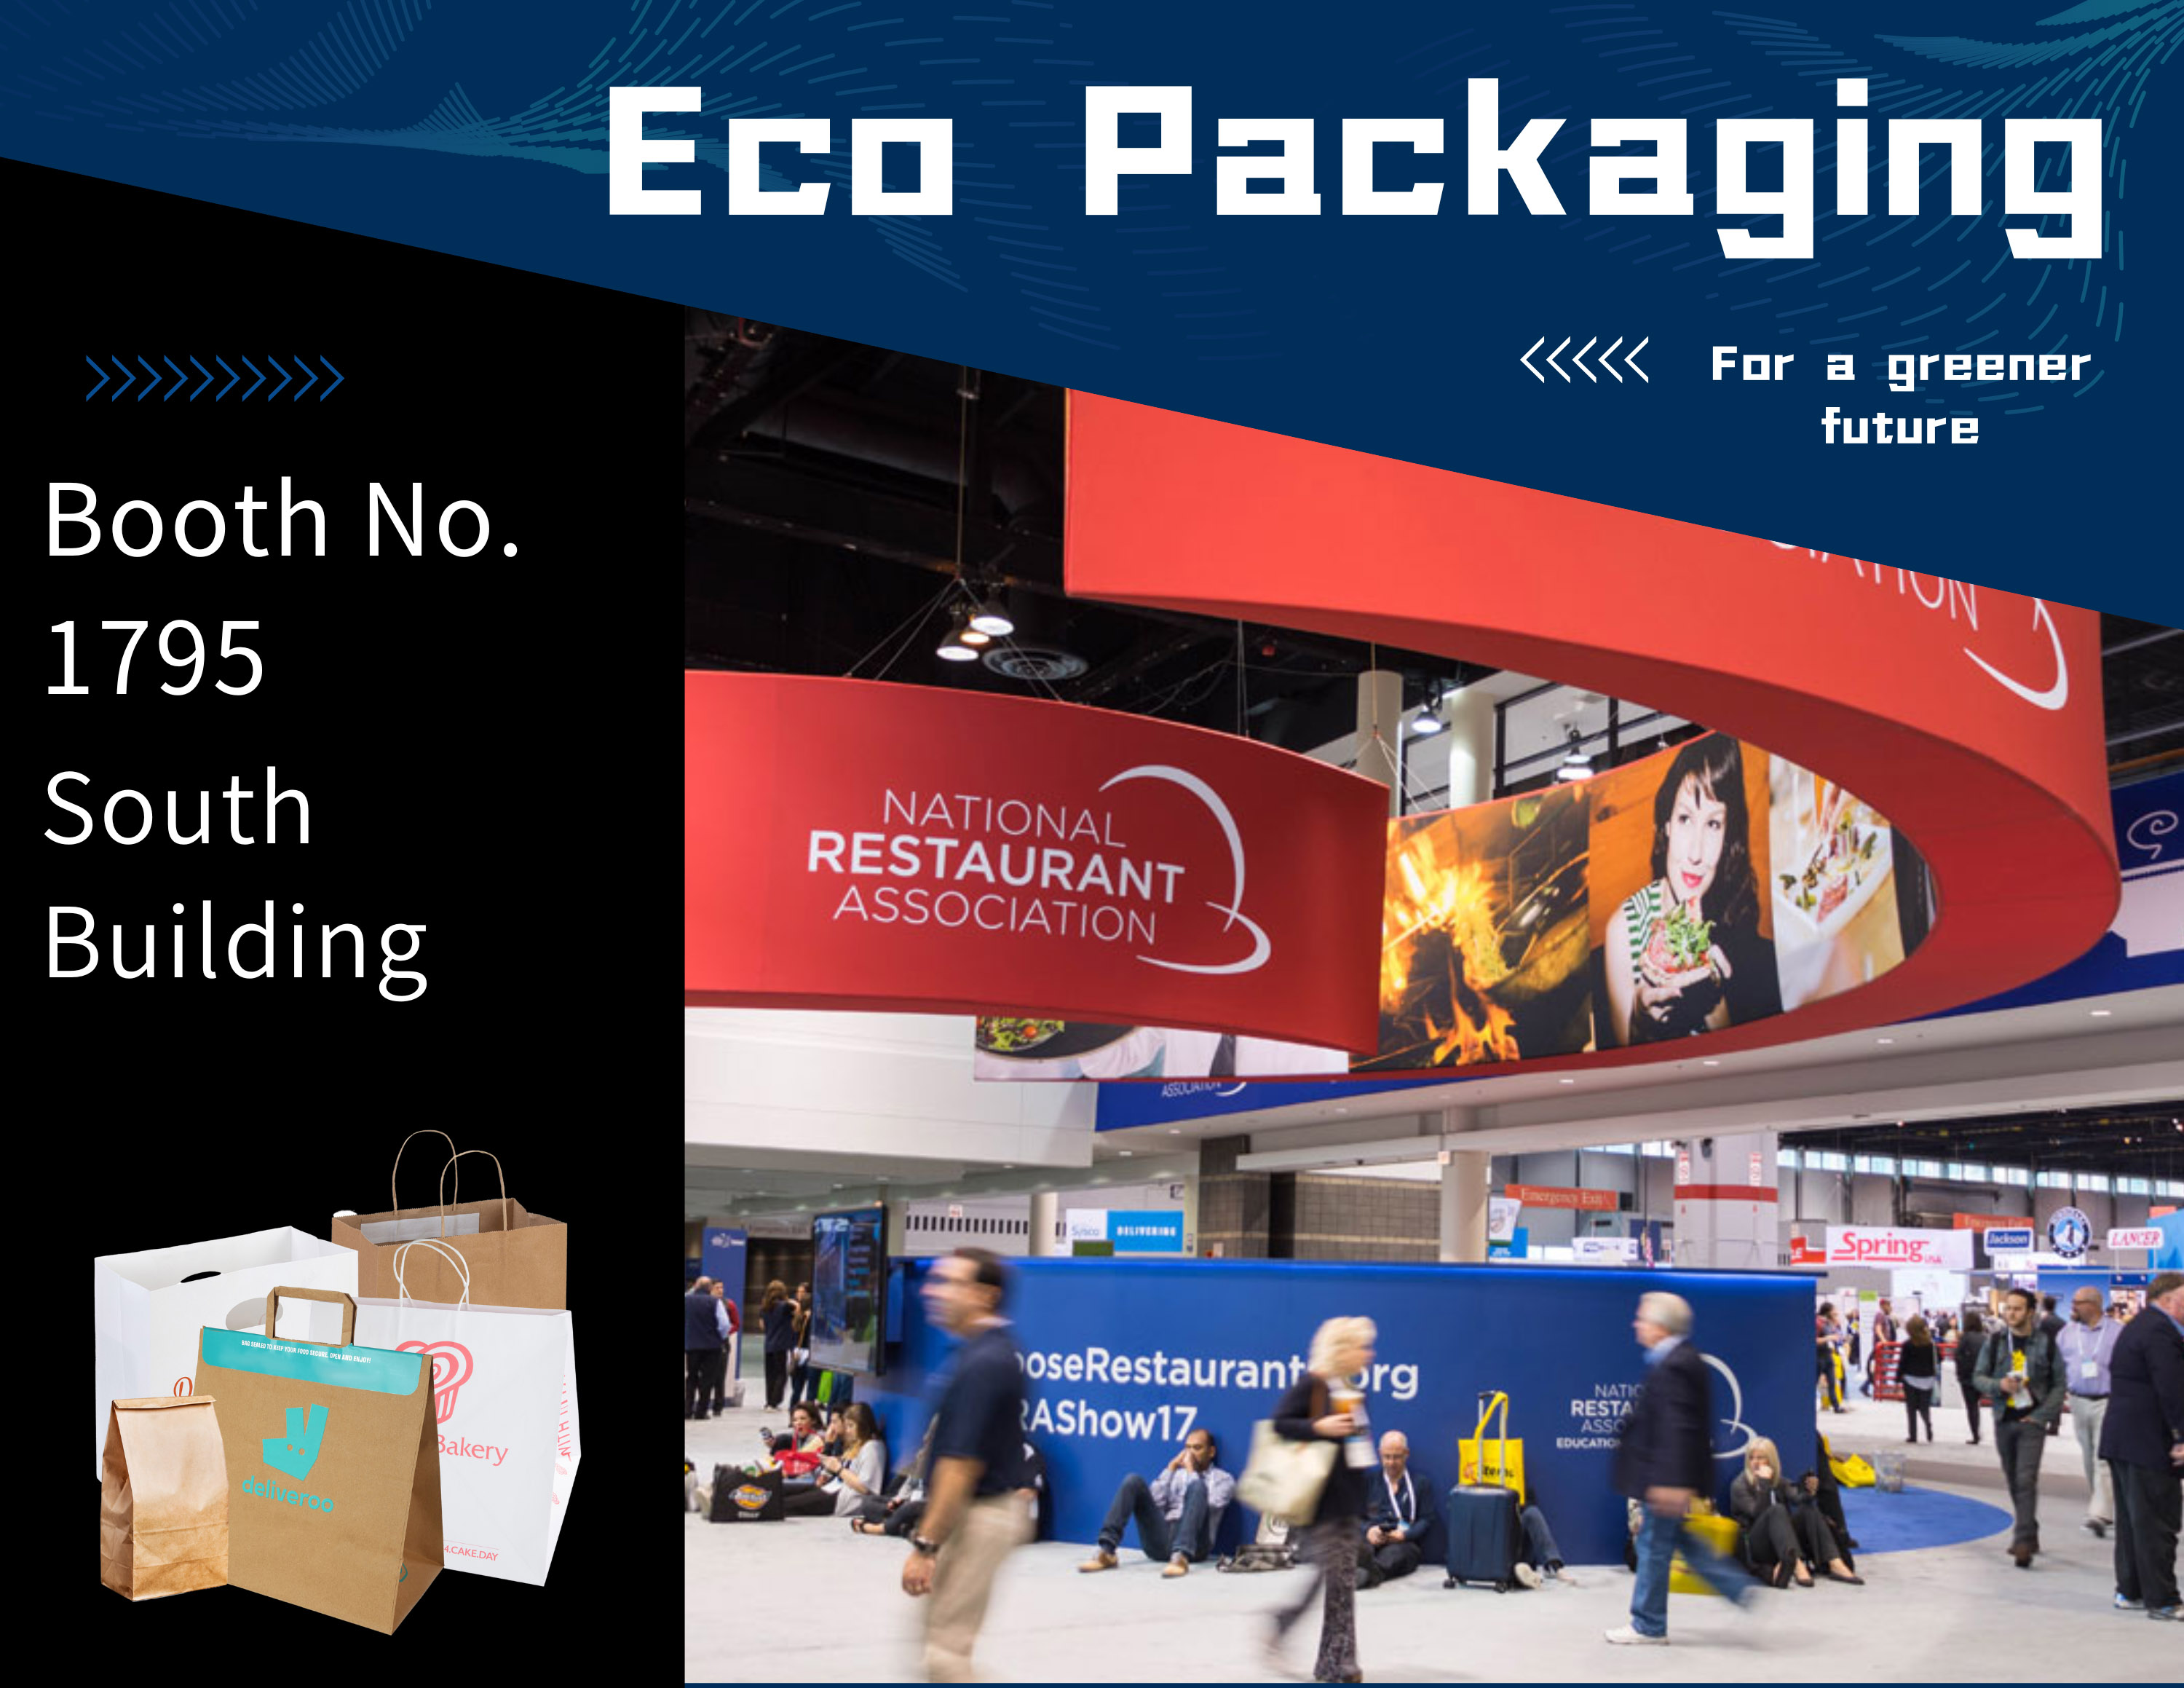 Get Ready for Eco Packaging's Showcase at NRA - National Restaurant Association 2024!